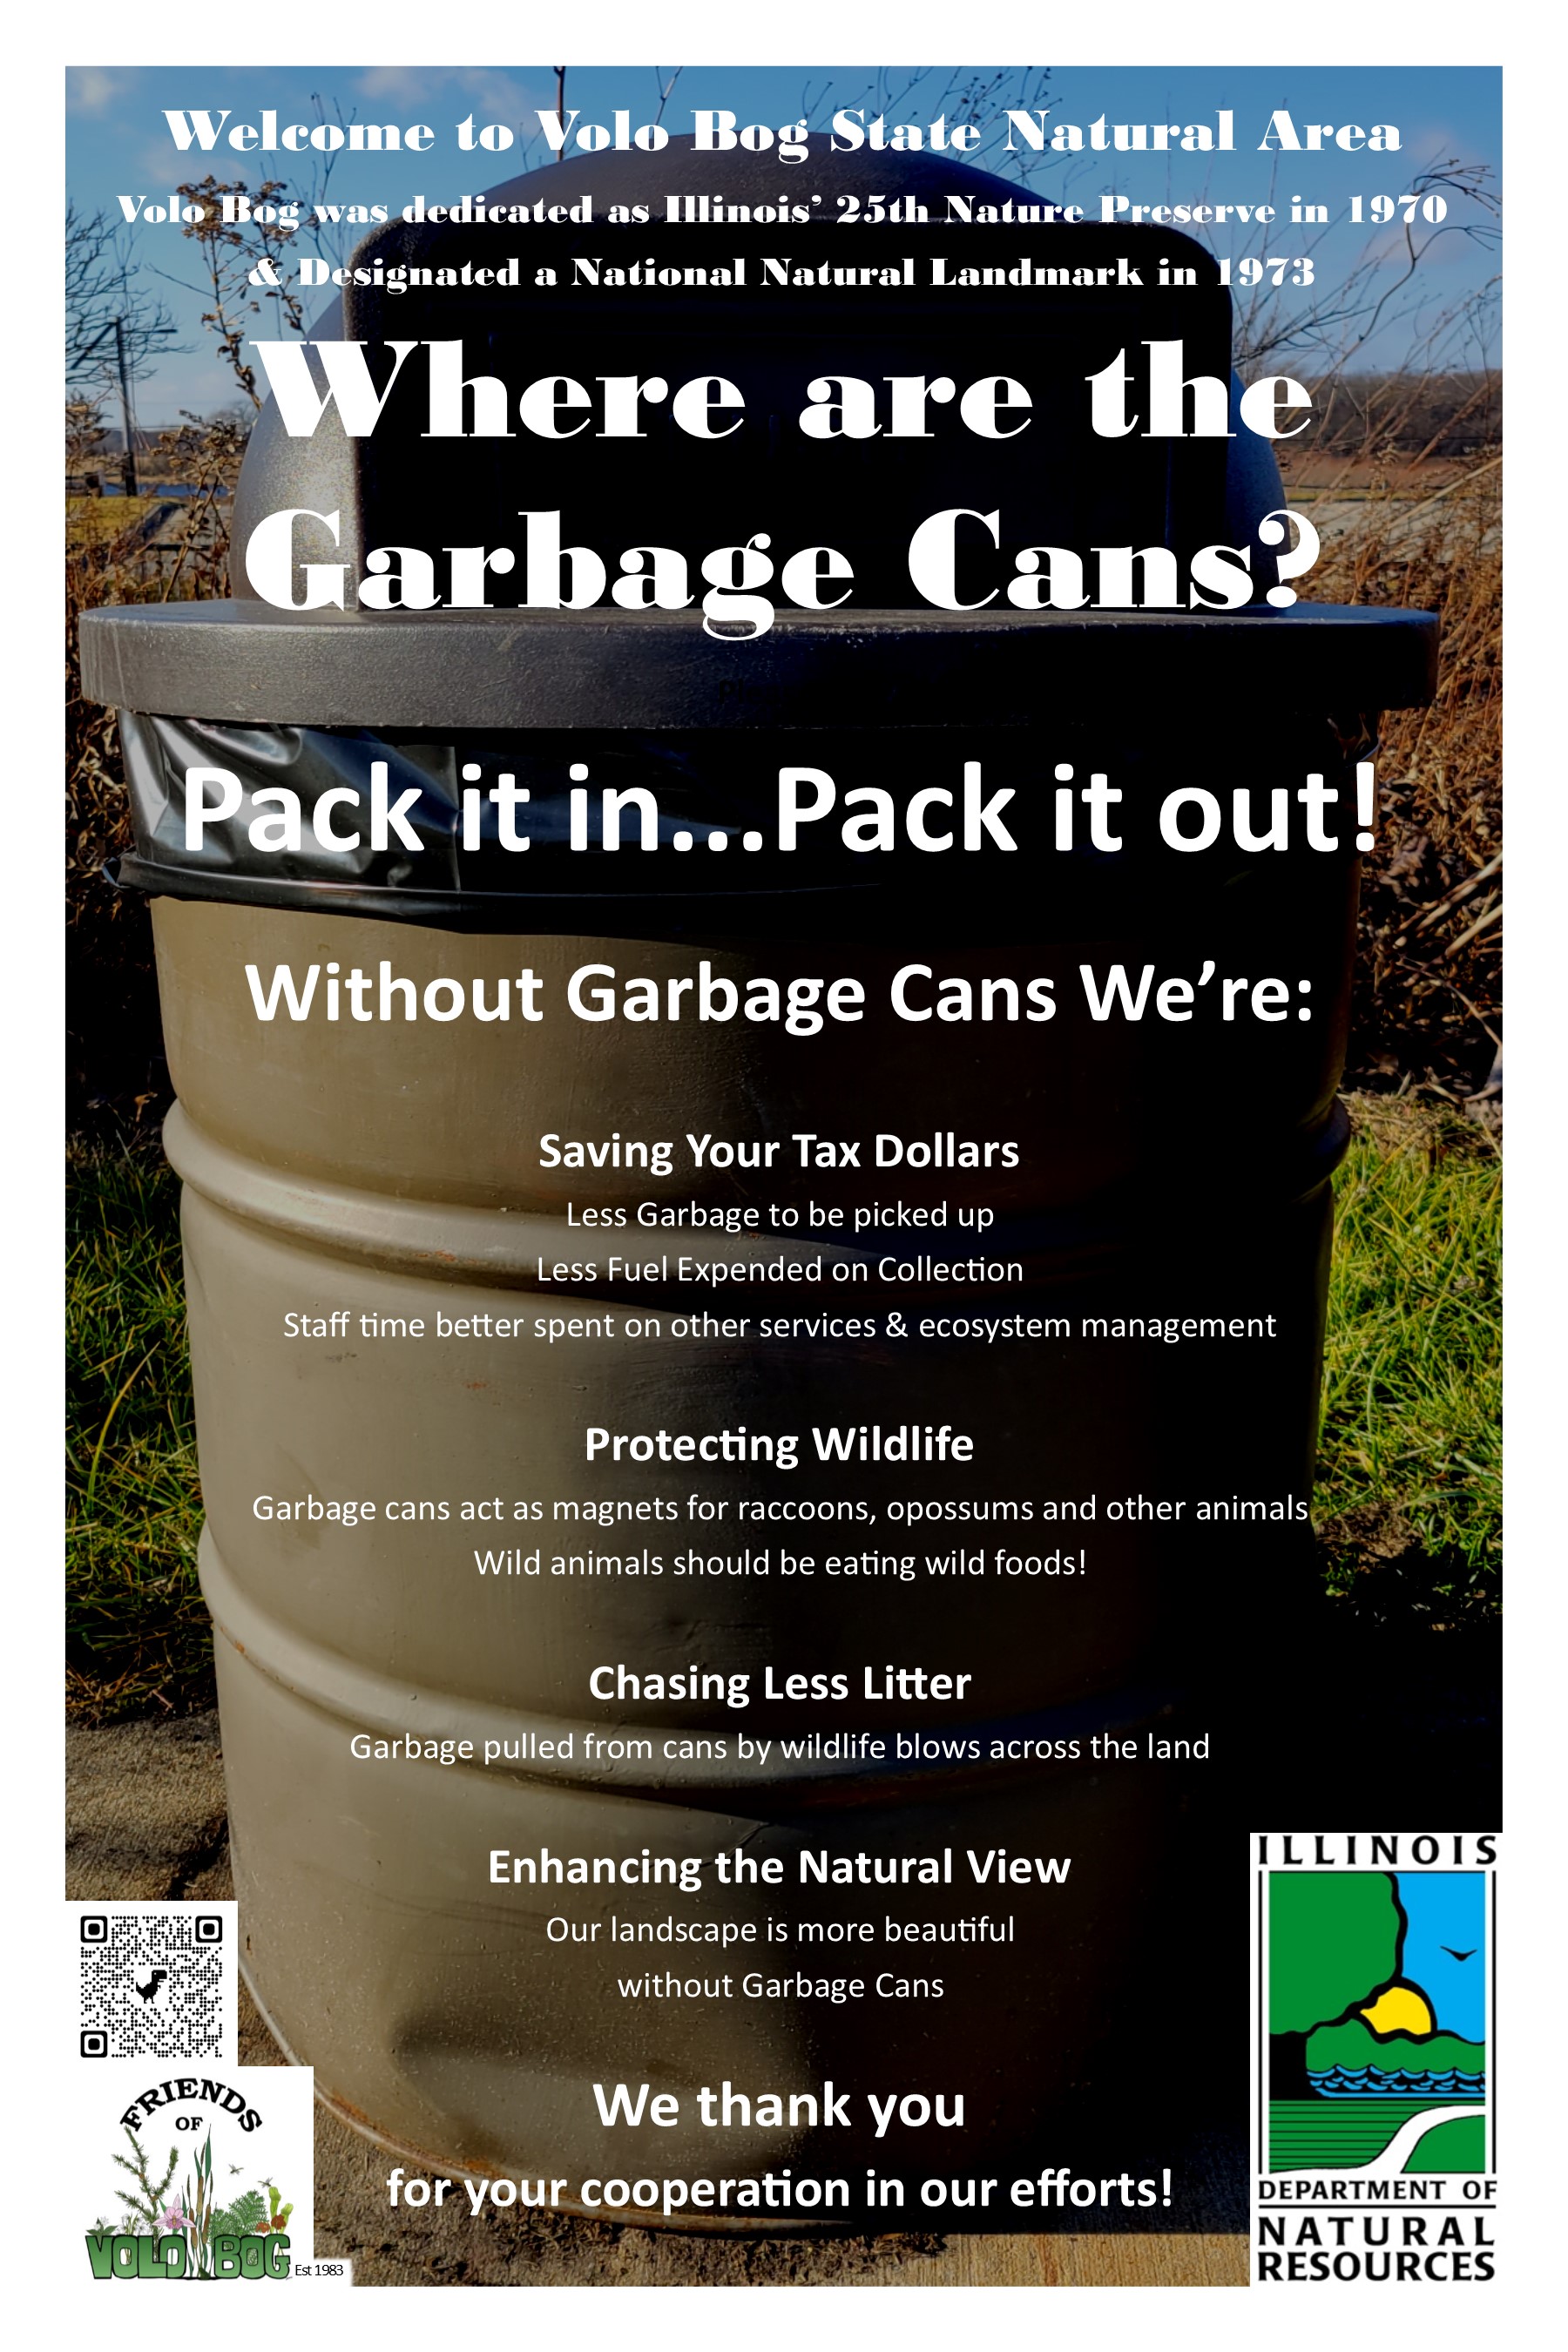 Where are the Garbage Cans - VBSNA Specific.jpg